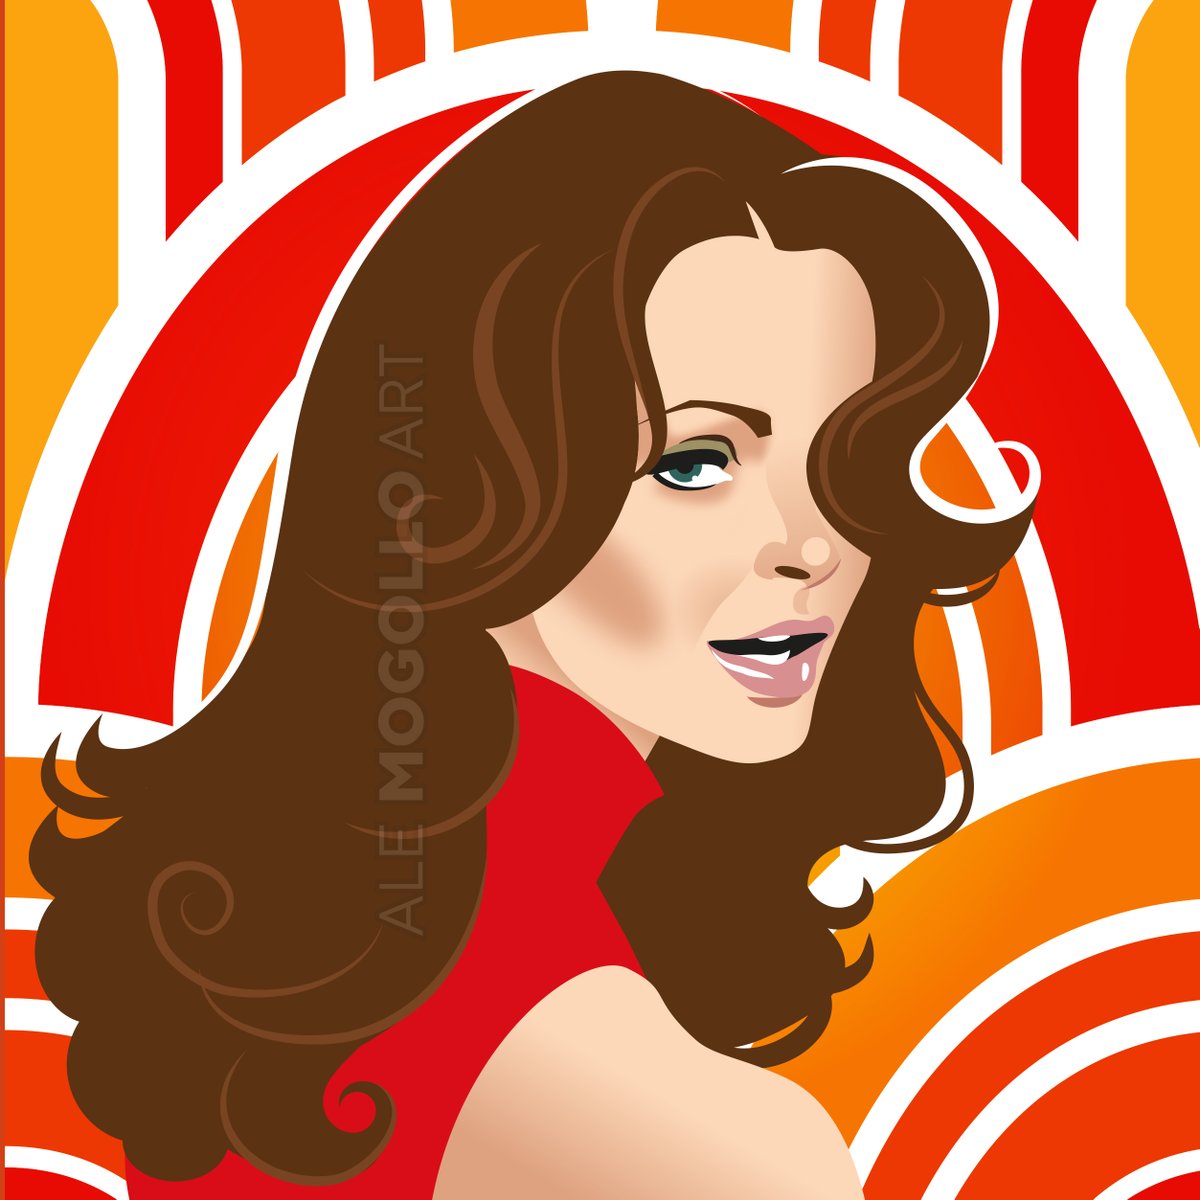 Happy 78 birthday to the preternaturally beautiful inside and out Jaclyn Smith, angel Kelly Garrett in the original Charlie’s Angels!
#jaclynsmith #kellygarrett #charliesangels #happybirthday #classictv #alejandromogolloart